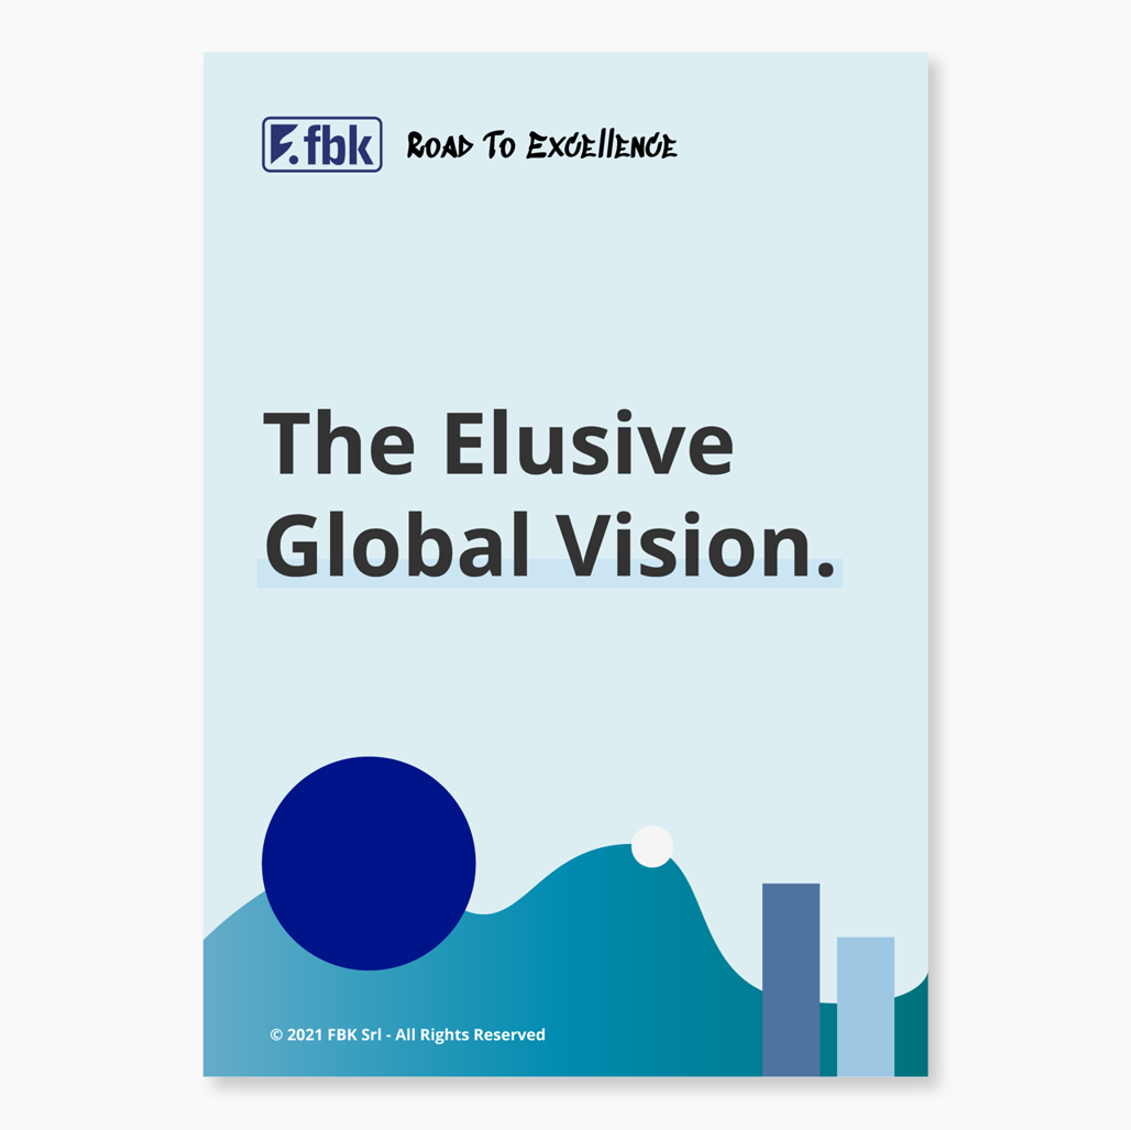 The Elusive Global Vision